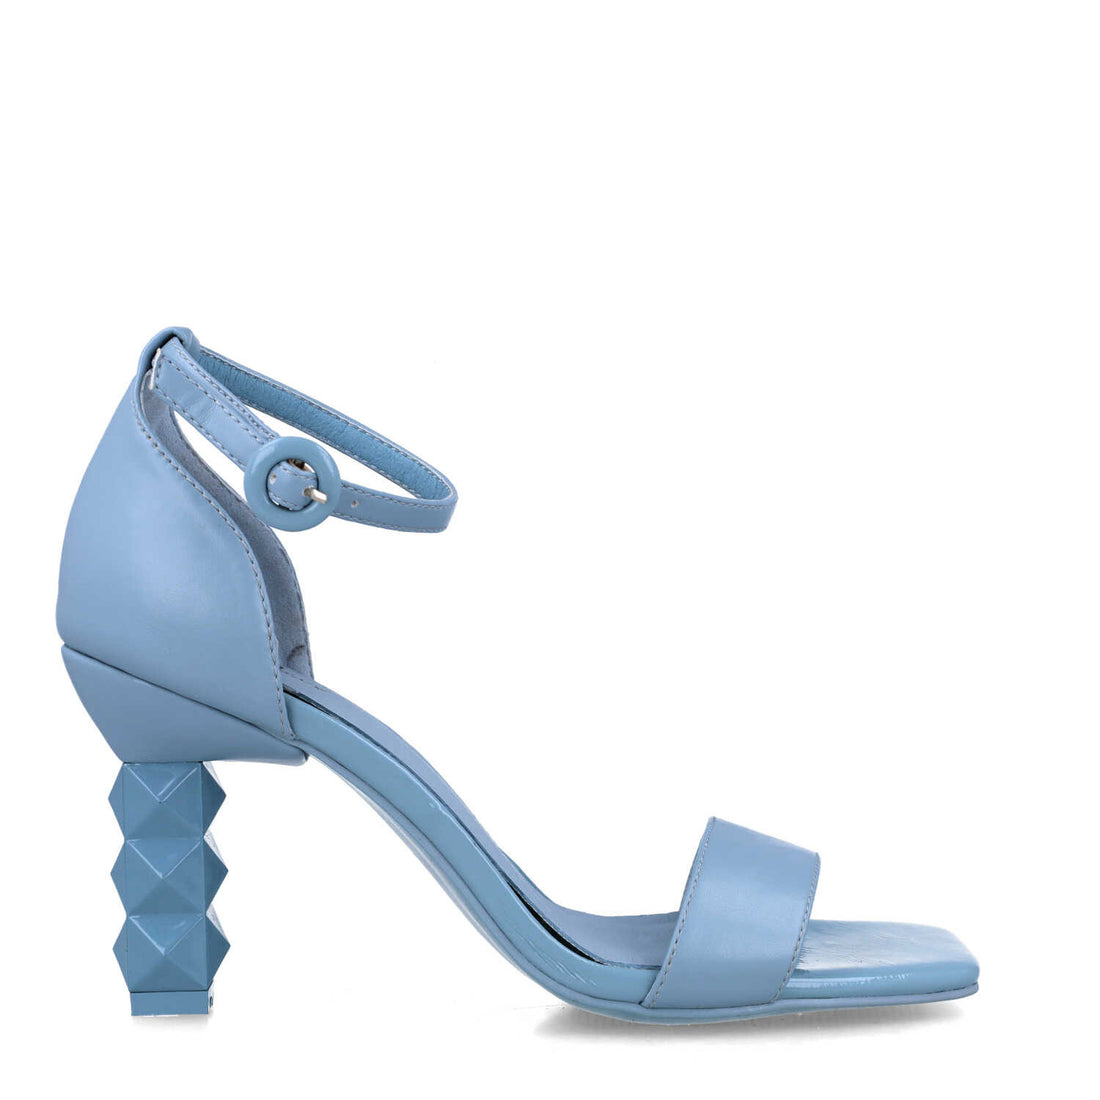 Blue Ankle-Strap Sandals With Studded Heel